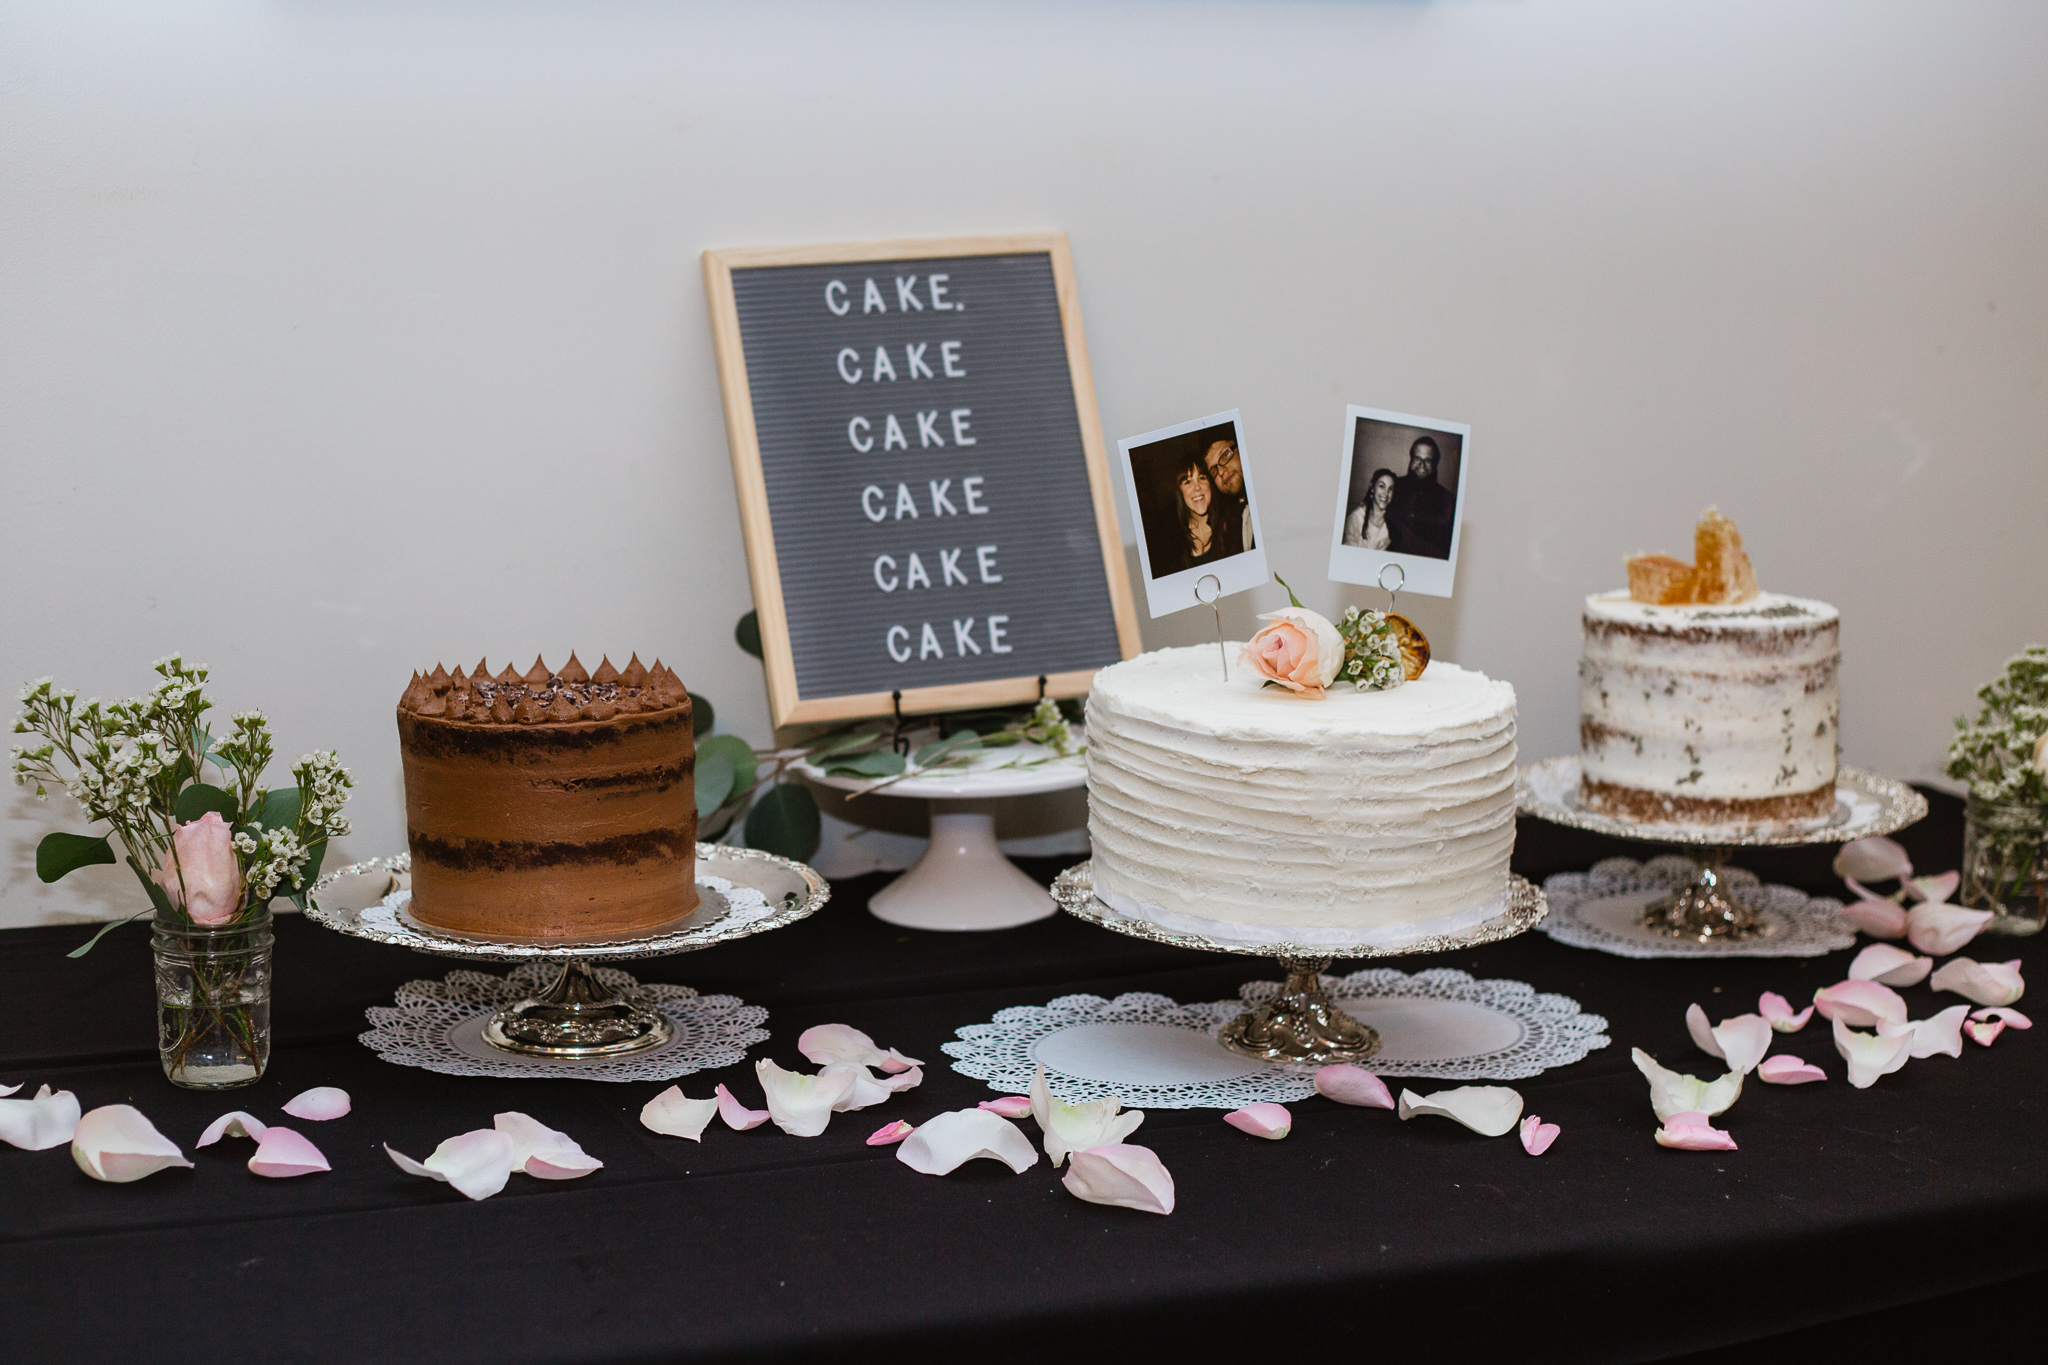 Vintage inspired cake table with cakes of orange, chocolate, and honey and lavender by Bear and the Honey Phoenix.